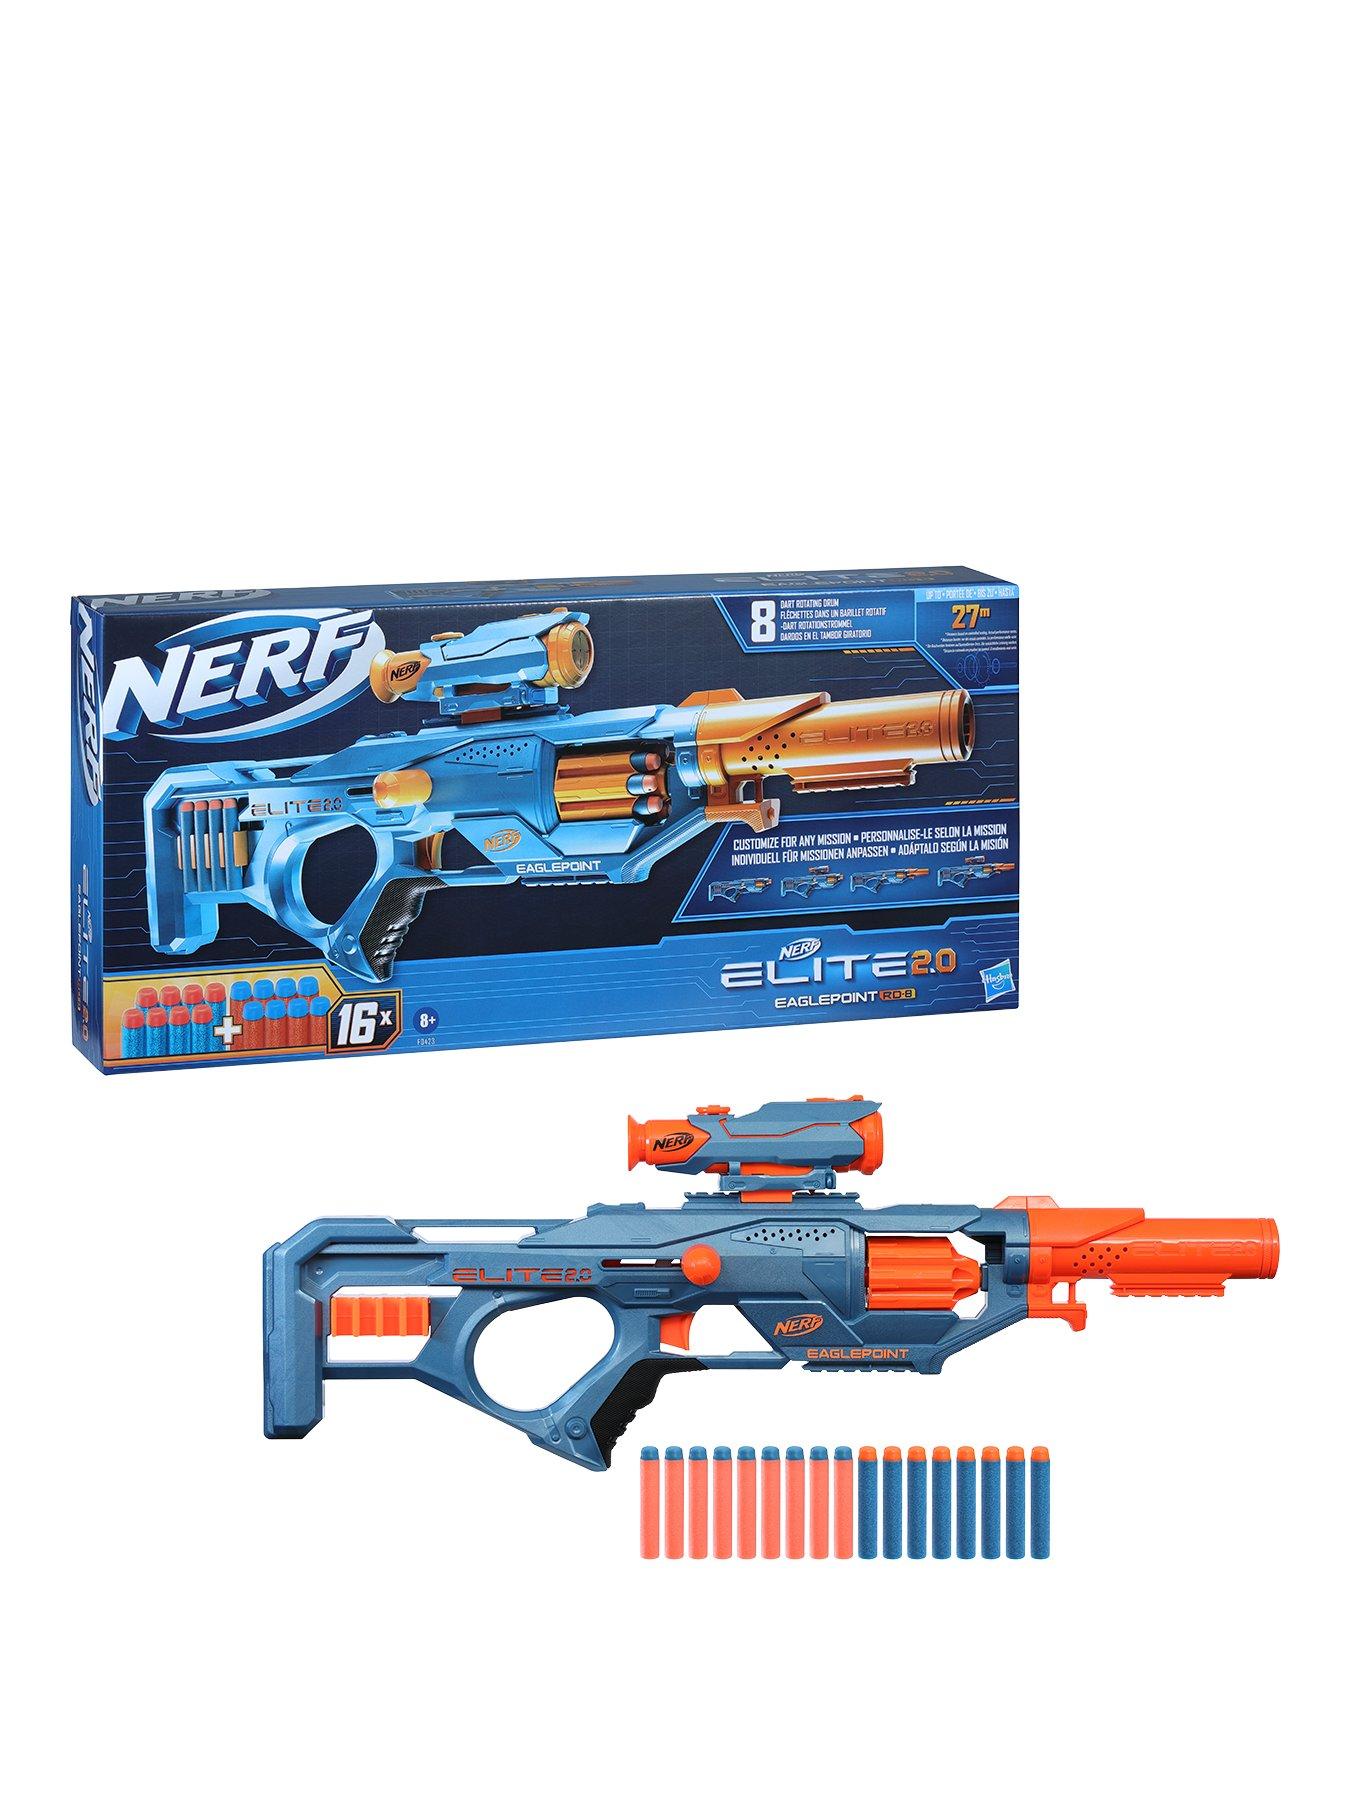 REVIEW] Nerf Elite 2.0 Eaglepoint RD-8 